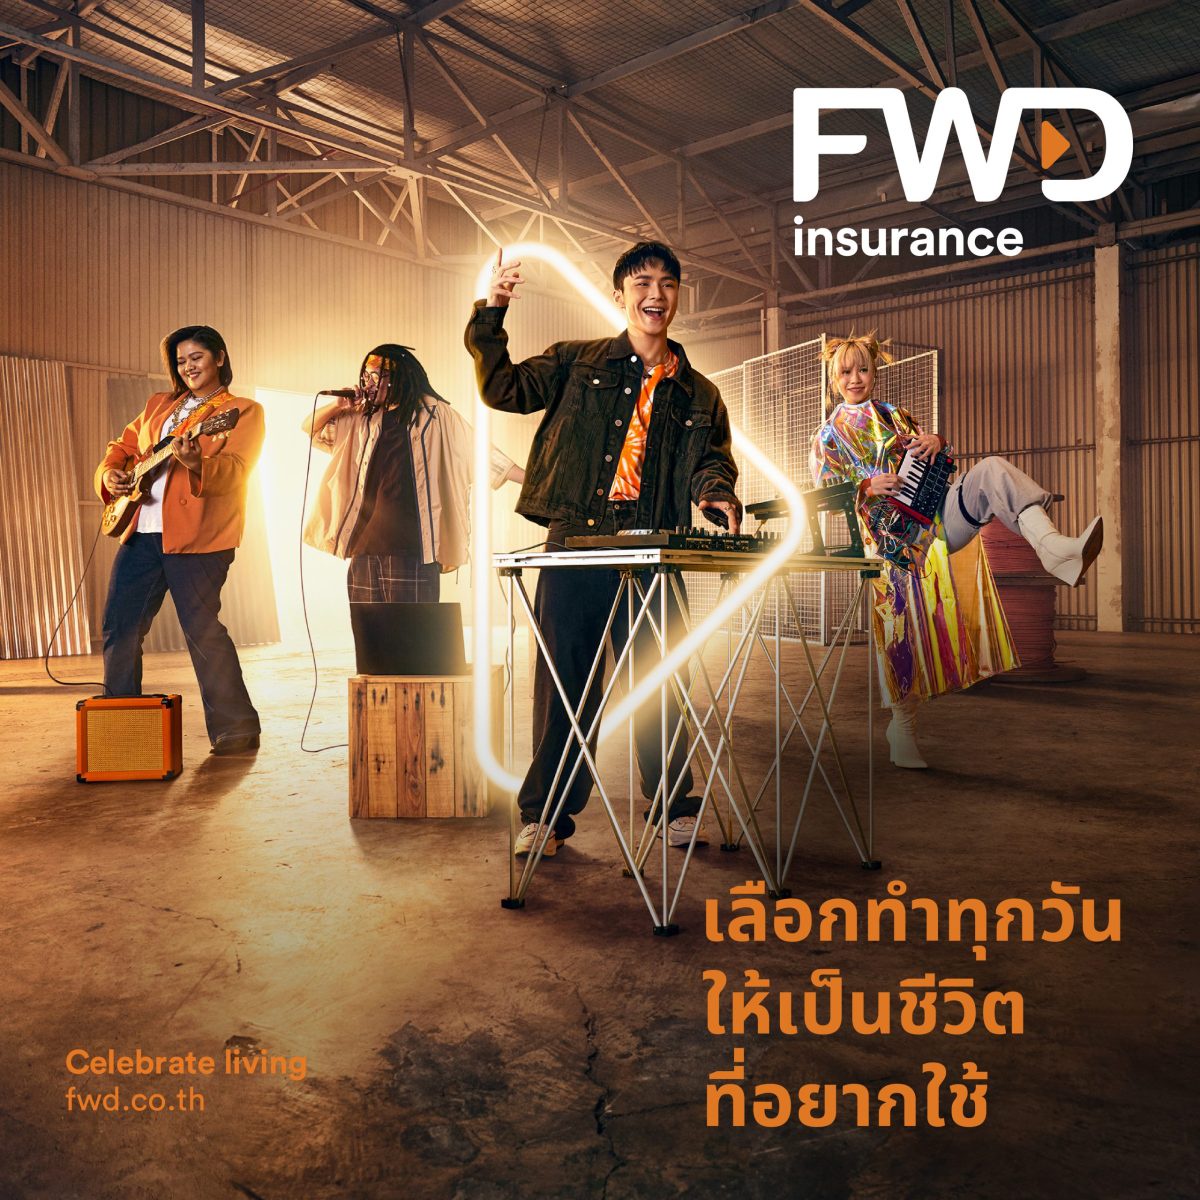 Go from dreamer to headliner with FWD Time to Play: an inspiring campaign by FWD Insurance